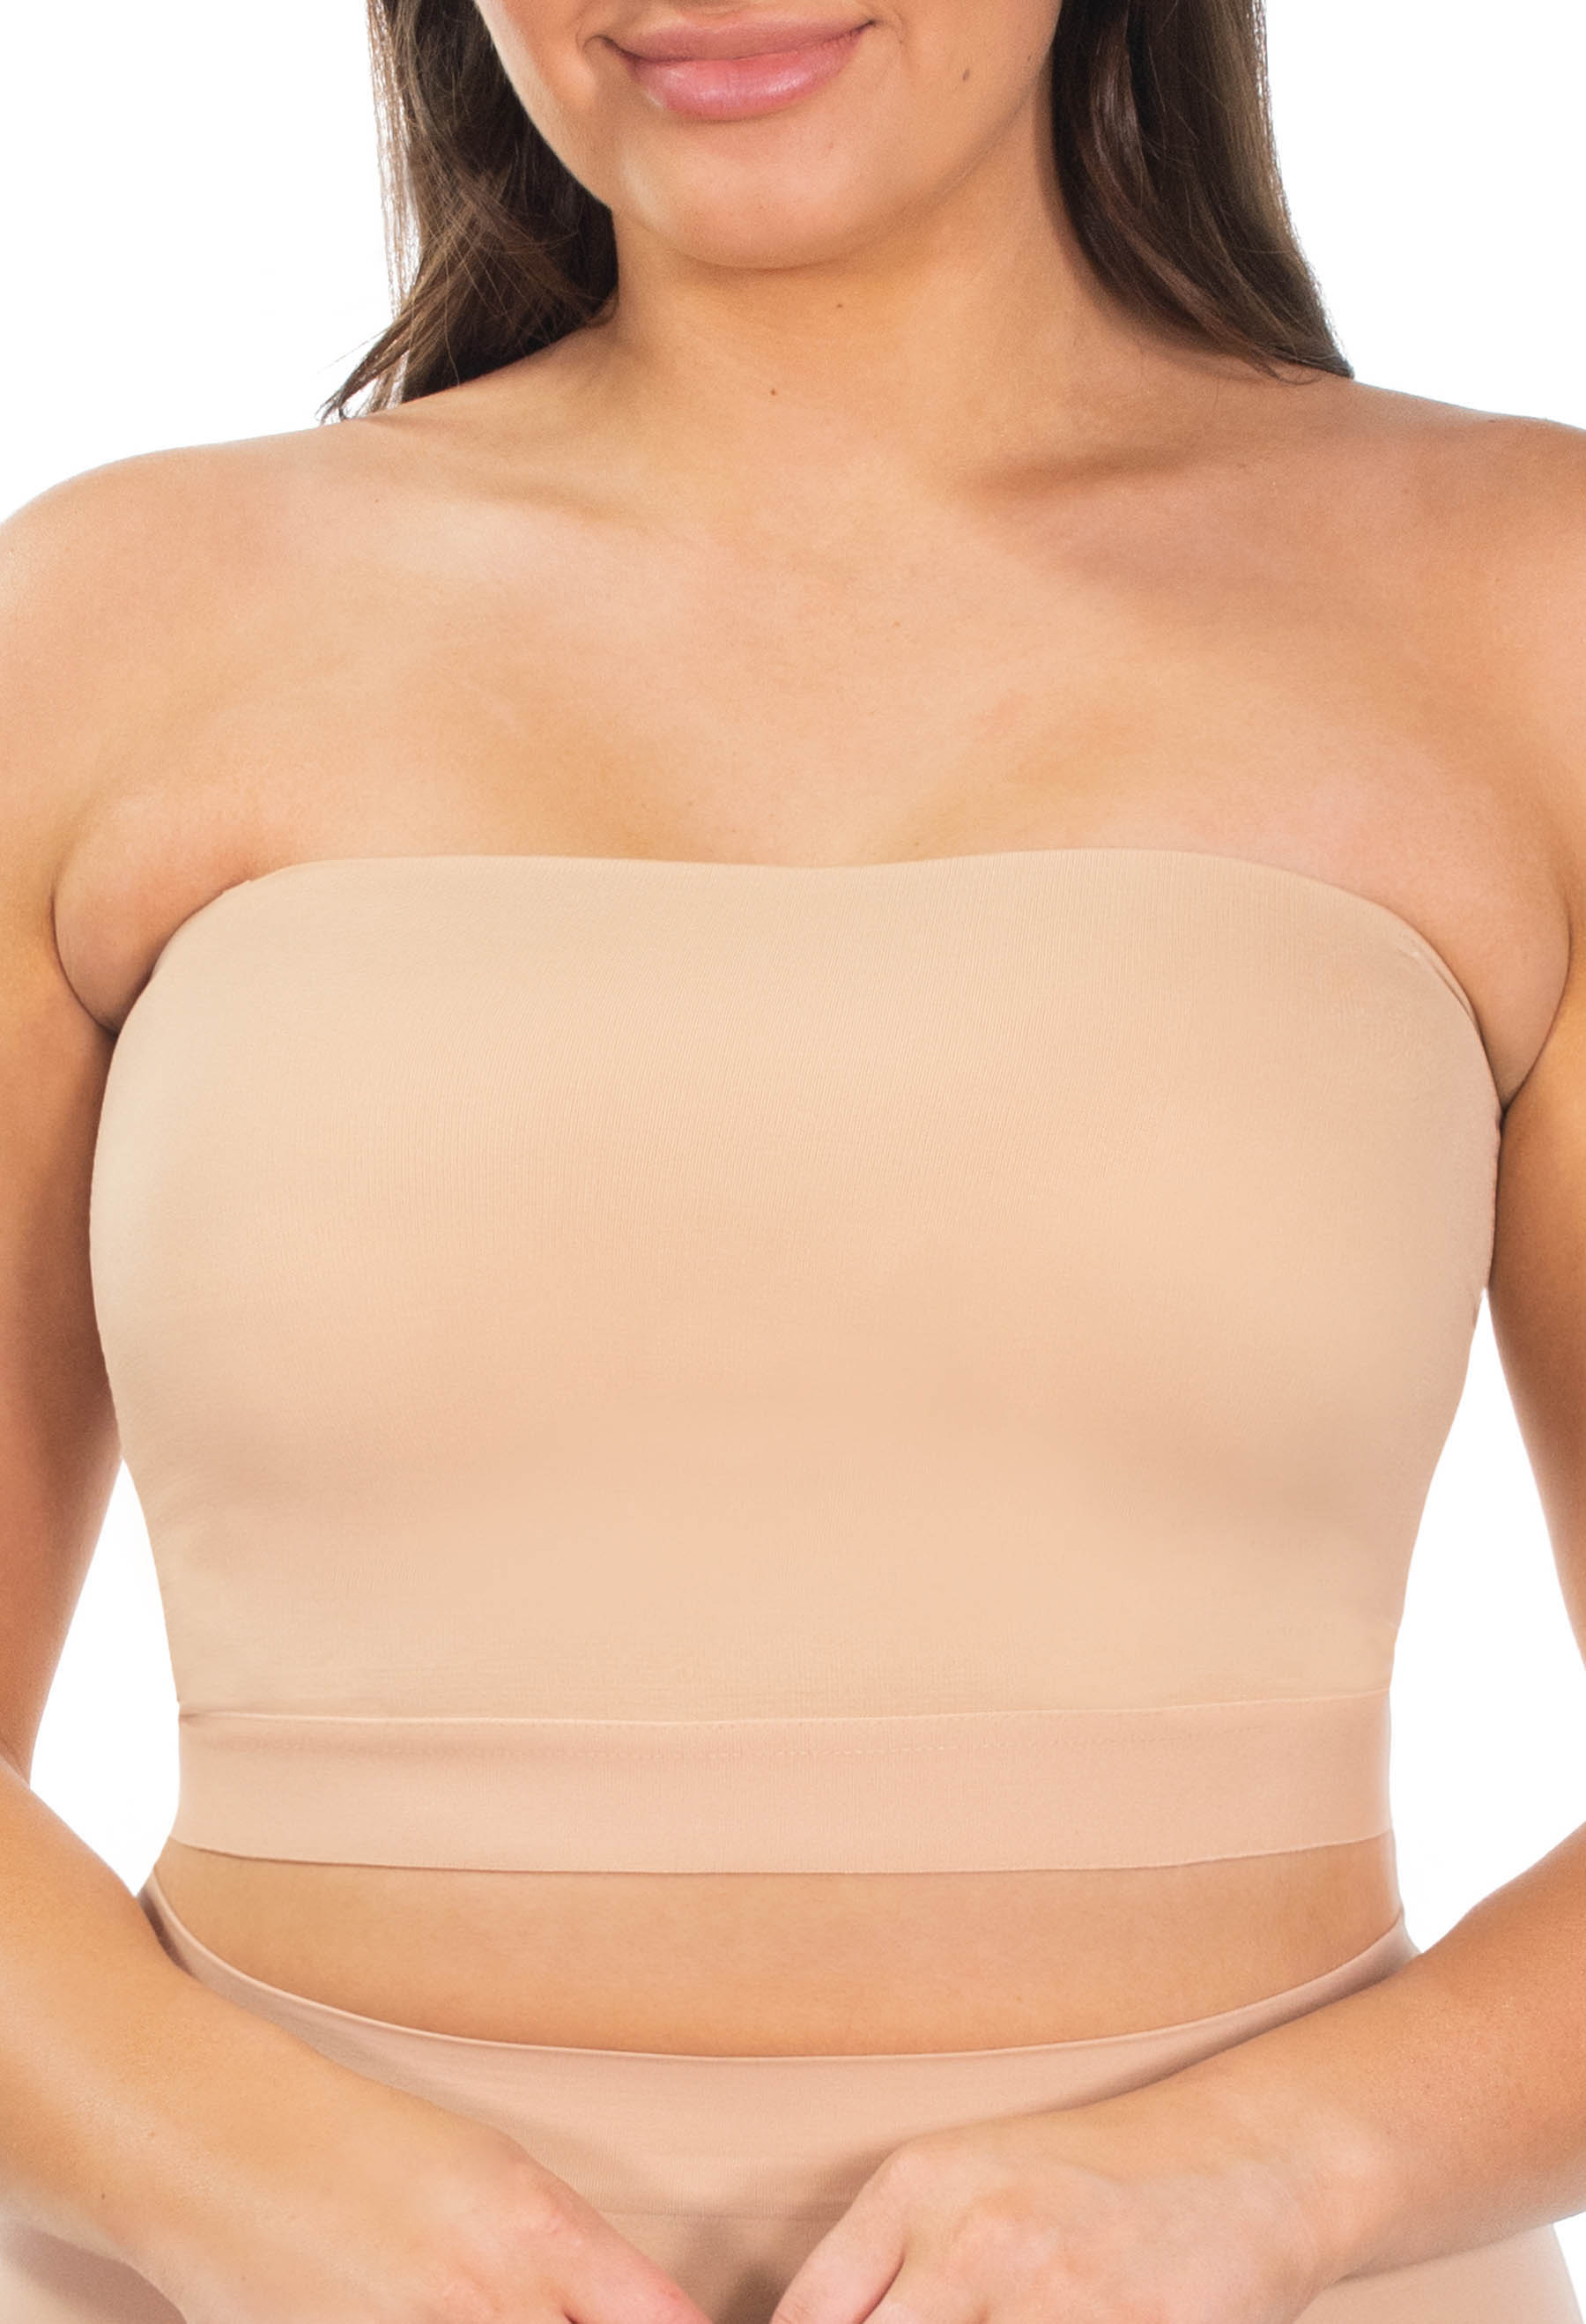 Women Summer Tube Top, Swim Top. 2 Layers Included Inserted Bra